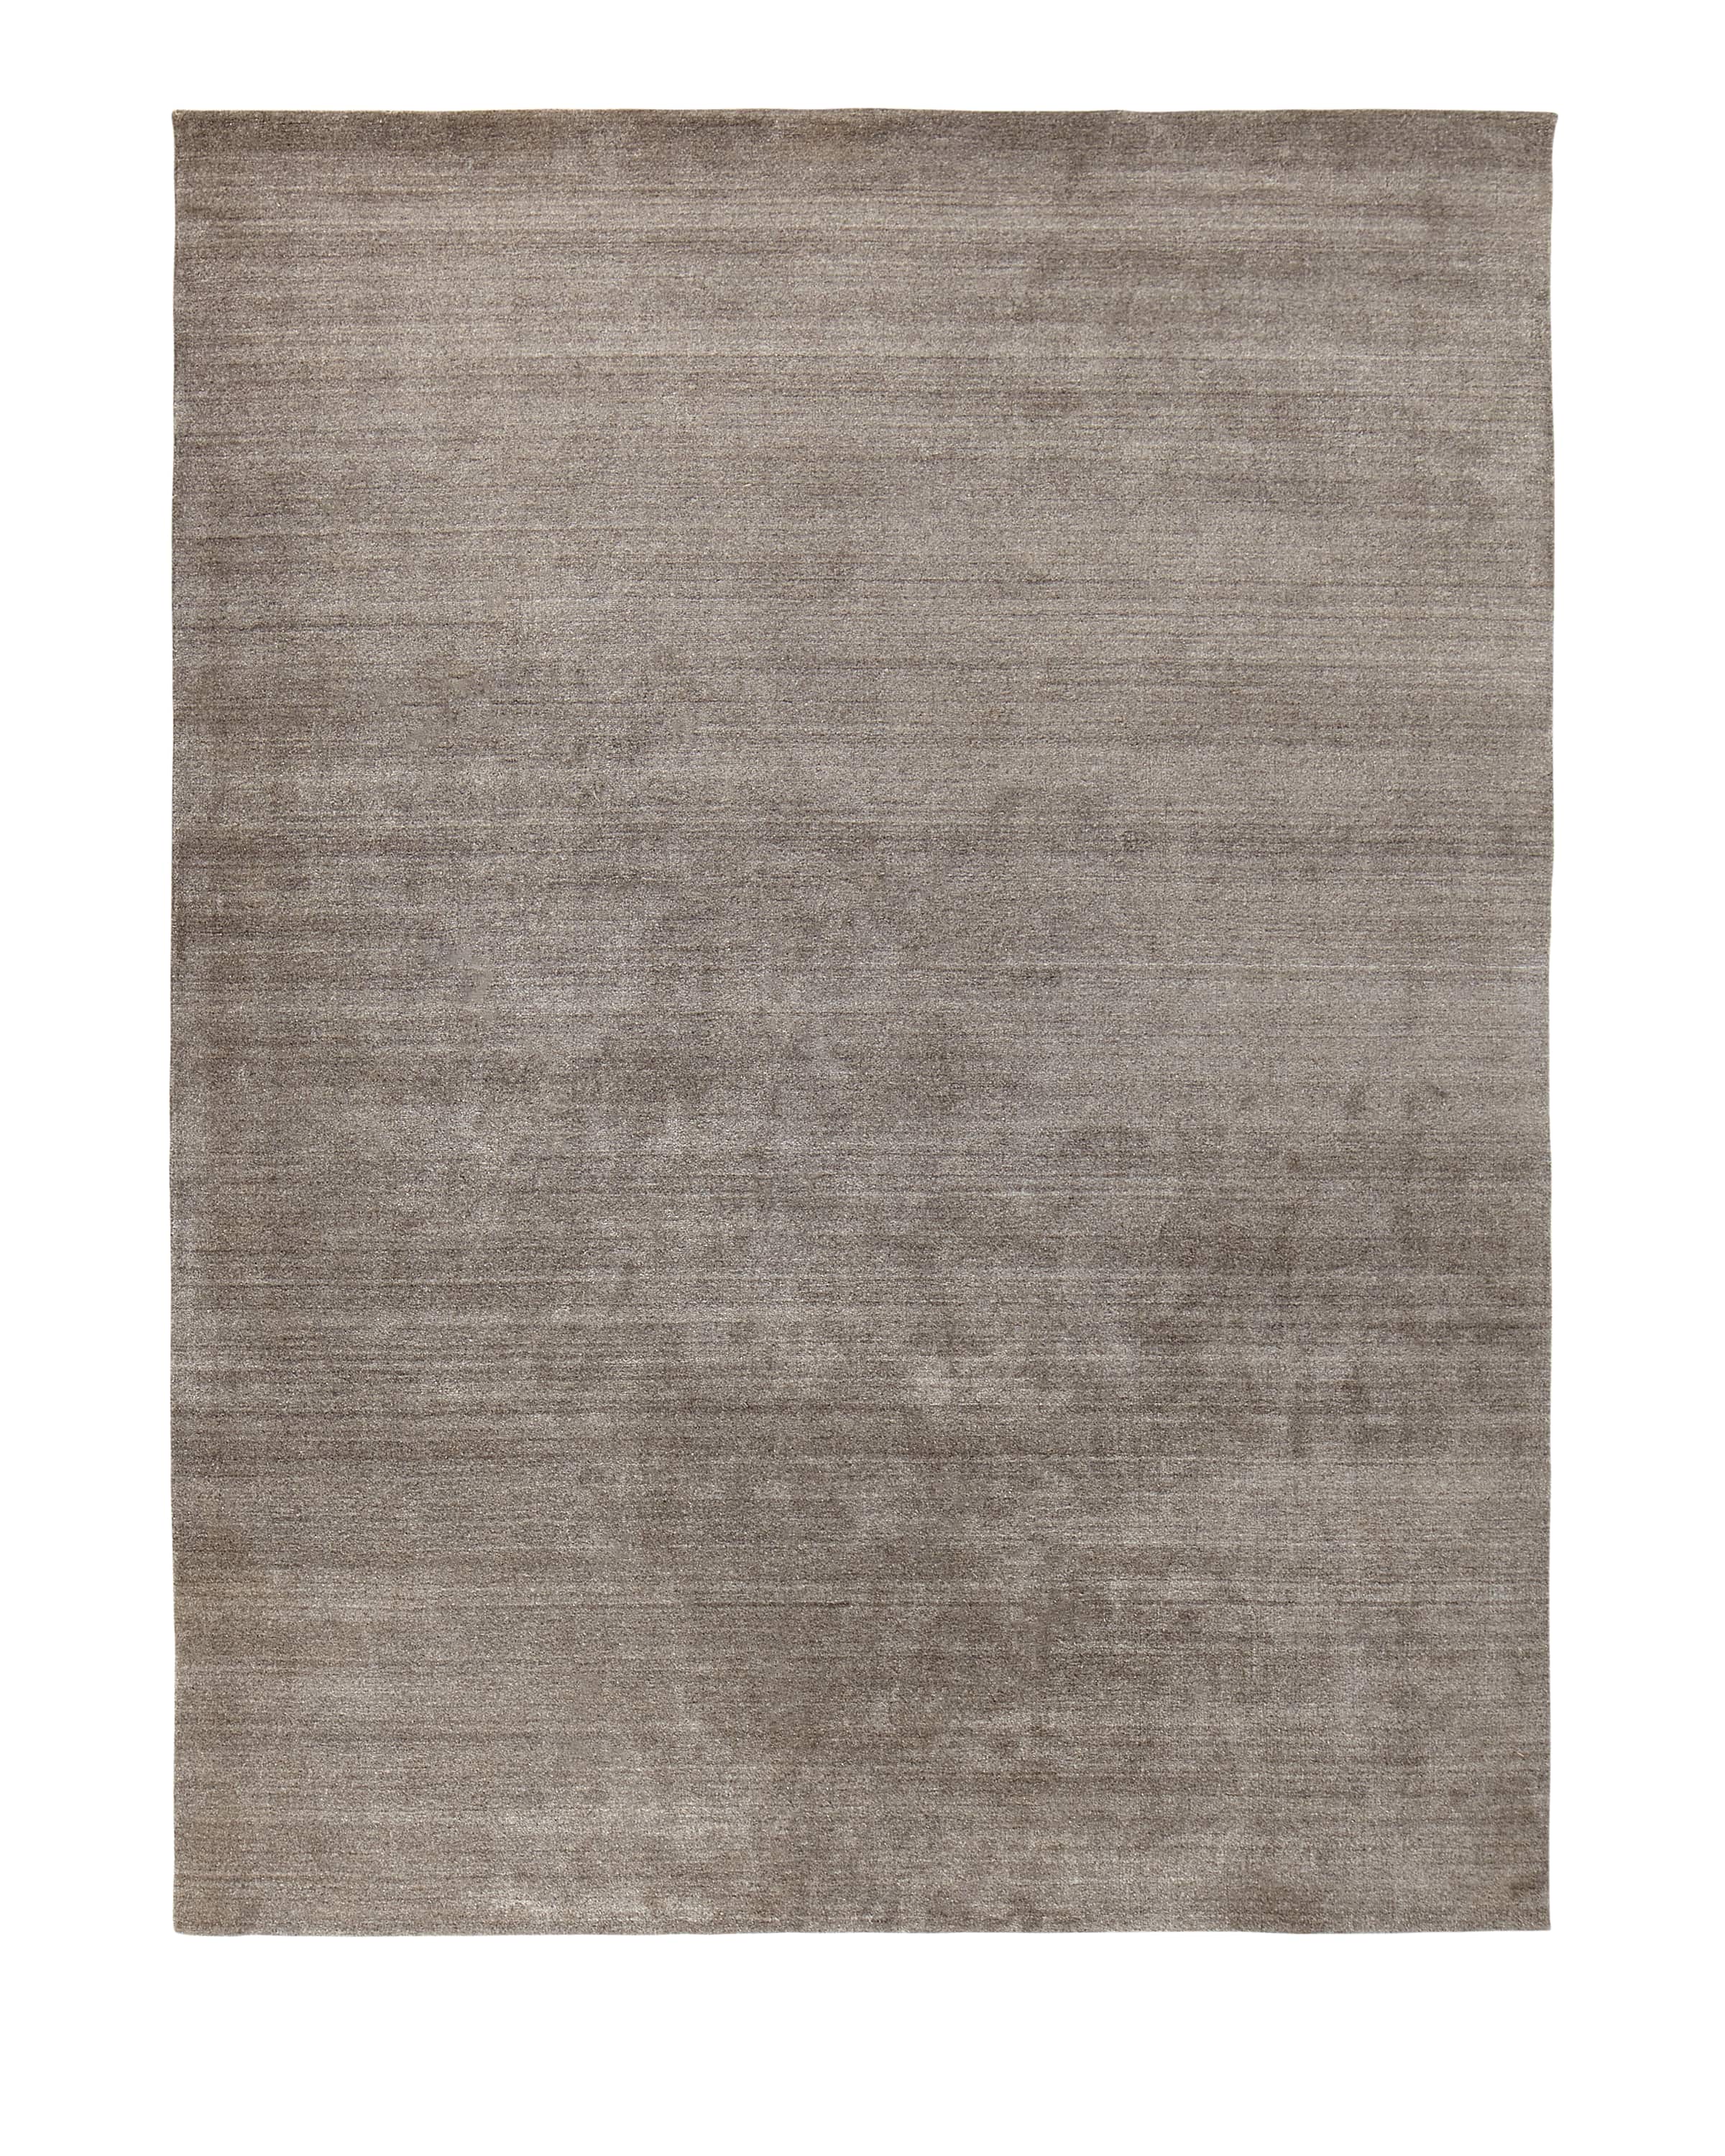 Exquisite Rugs Thames Rug, 6' x 9'